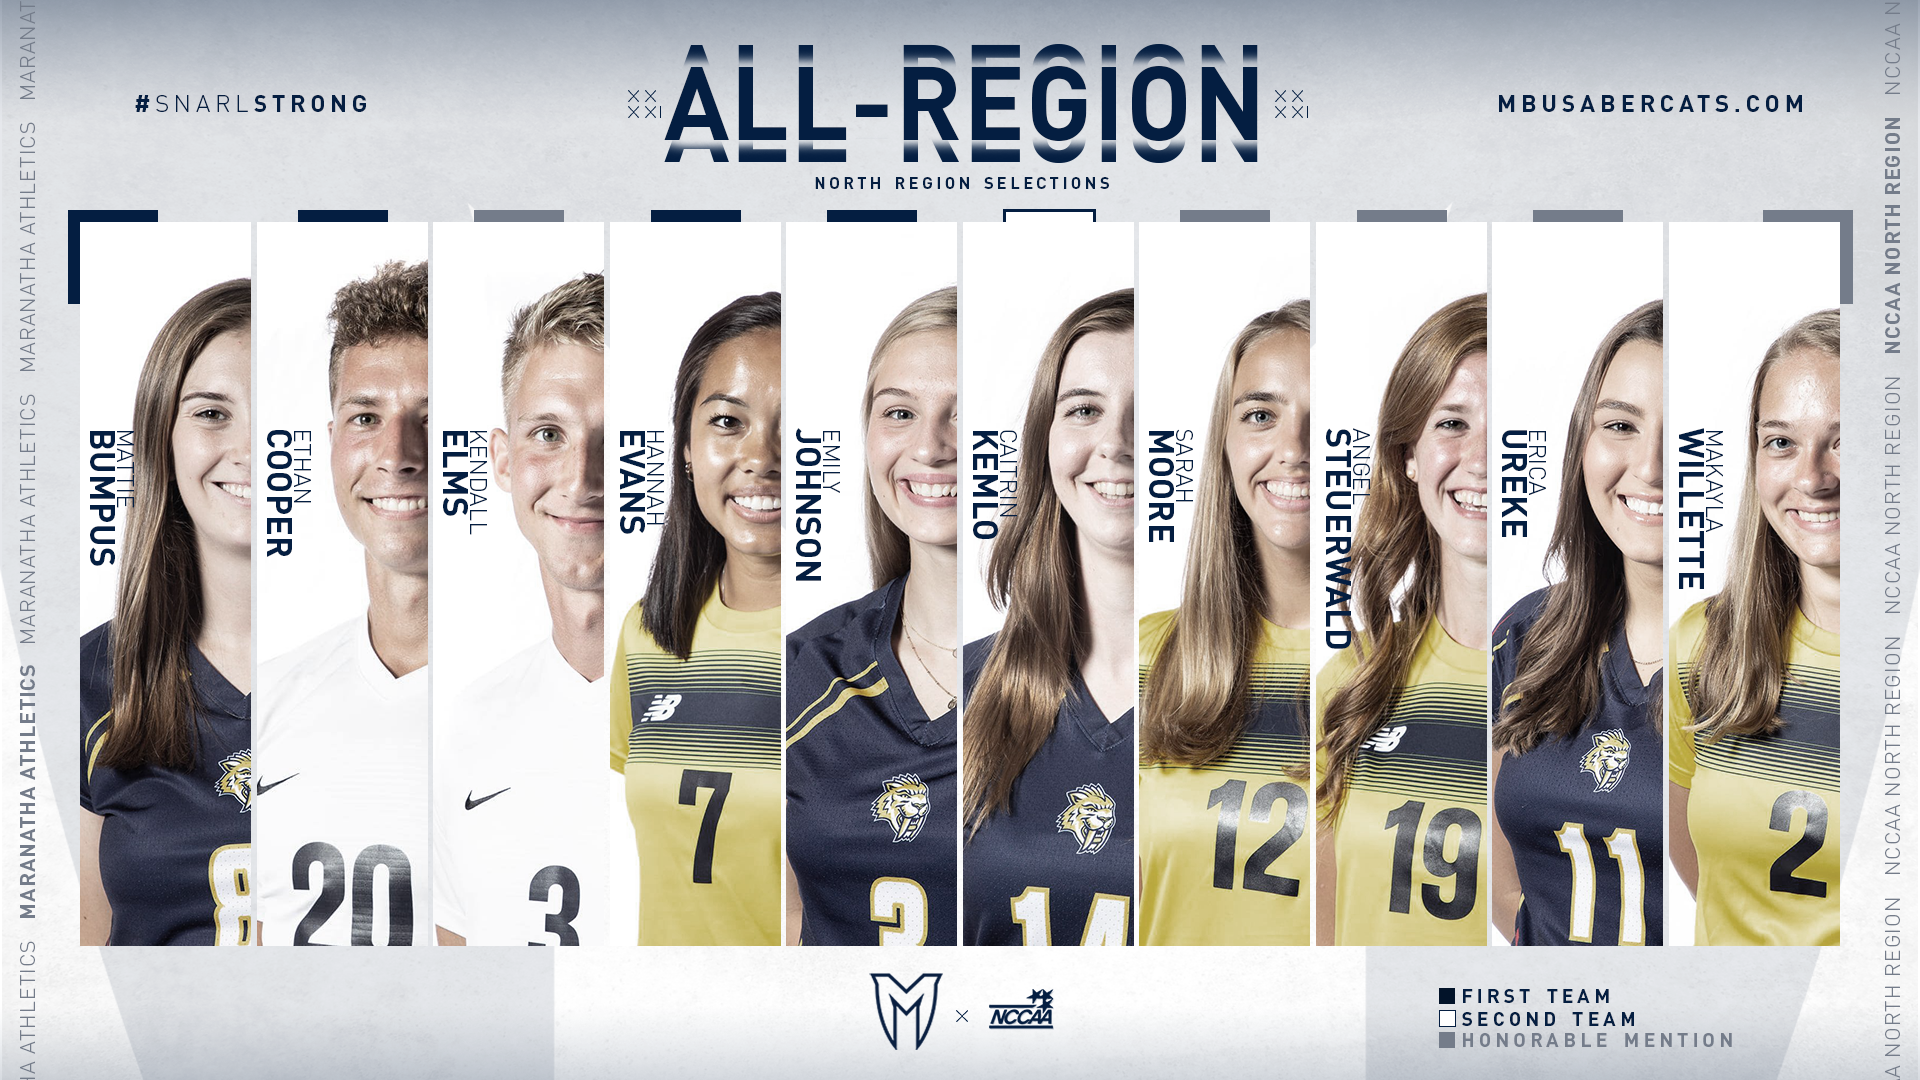 All-Region Selections Announced